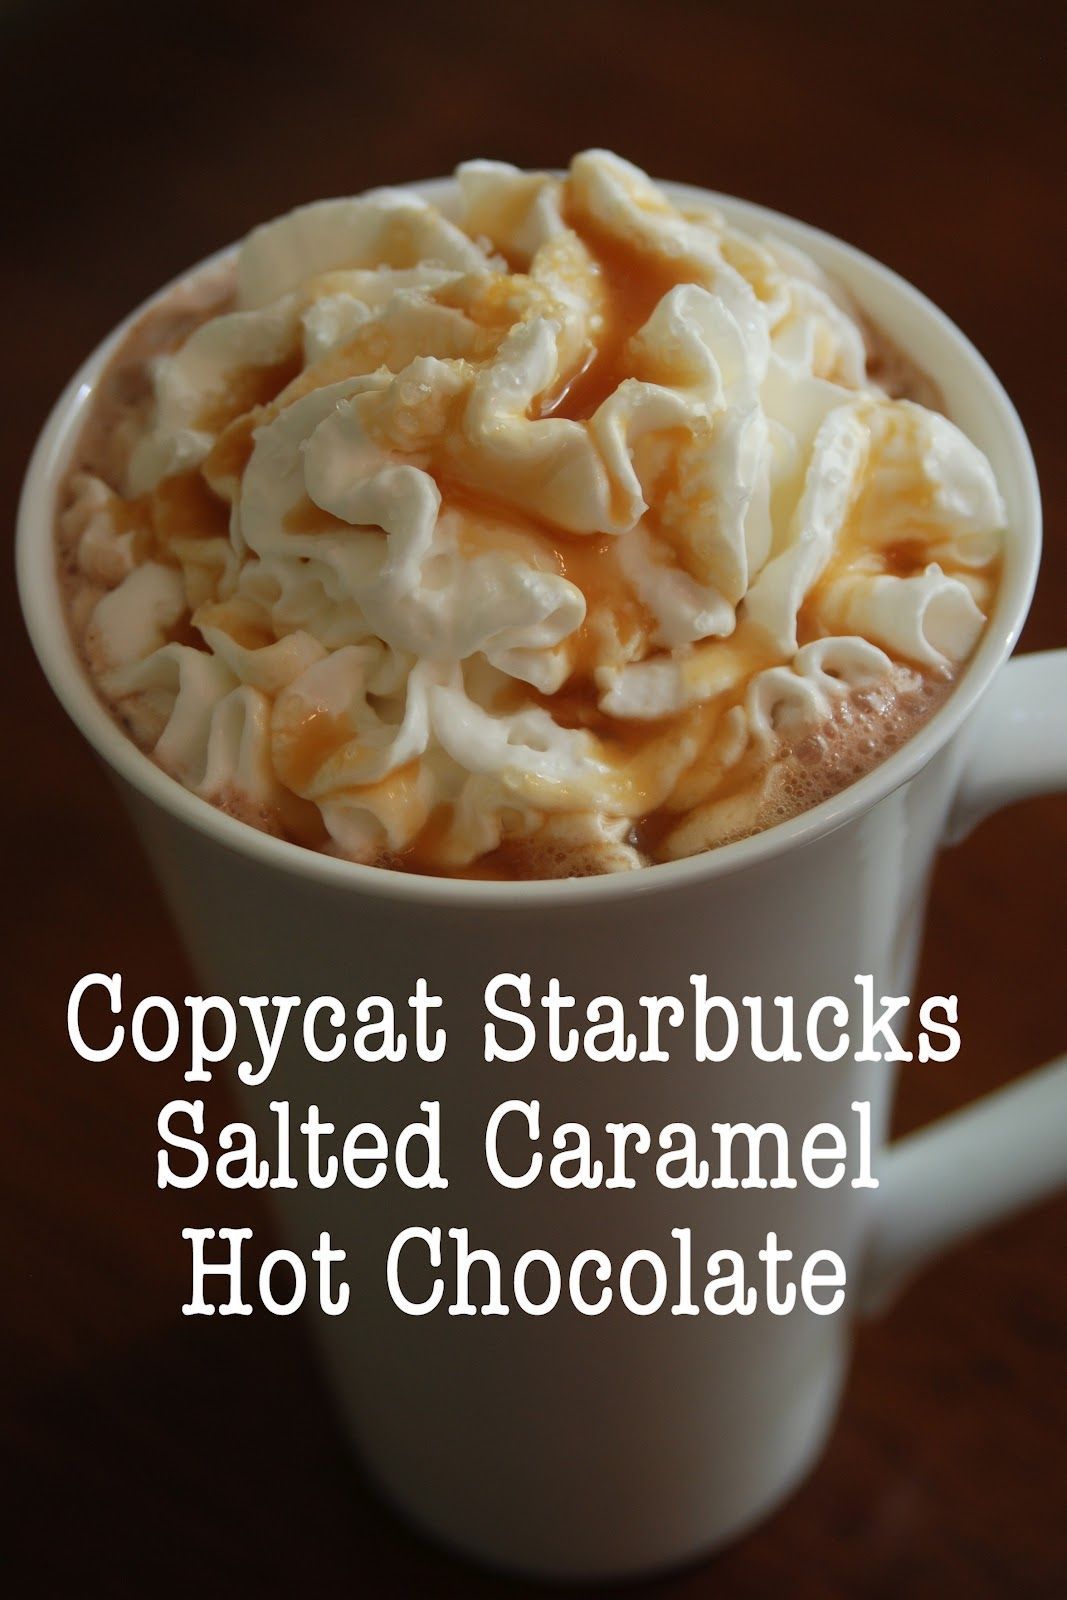 Copycat Starbucks Salted Caramel Hot Chocolate Recipe @Melissa Squires Squires Squires Squires Squires Brown found this for me. Im so